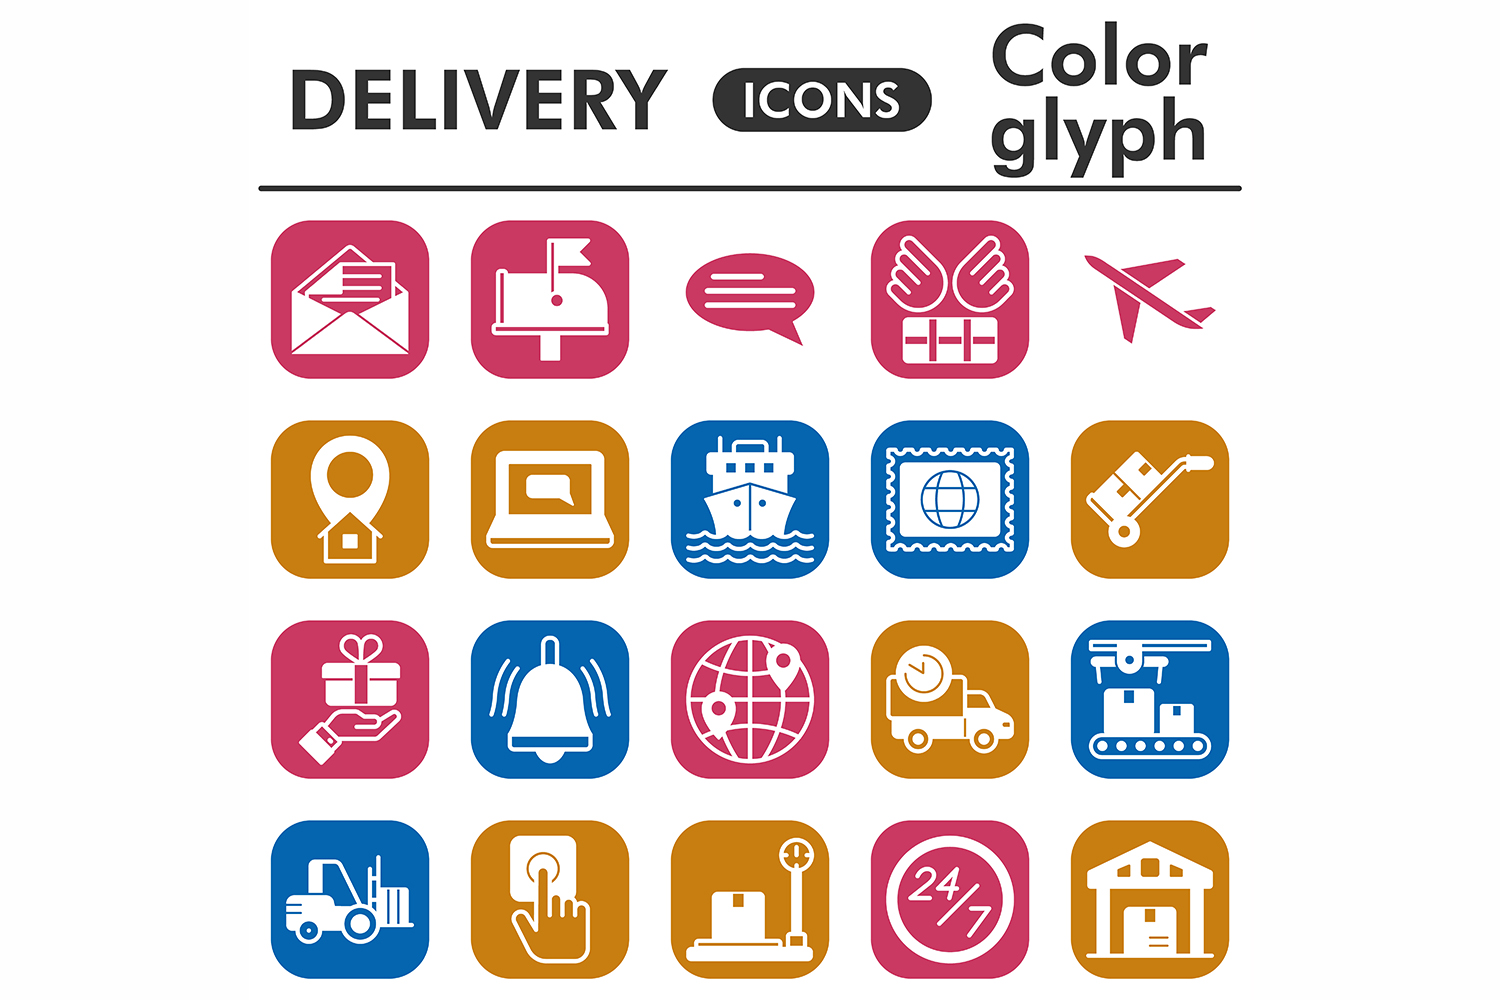 Delivery icons set, color glyph pinterest preview image.